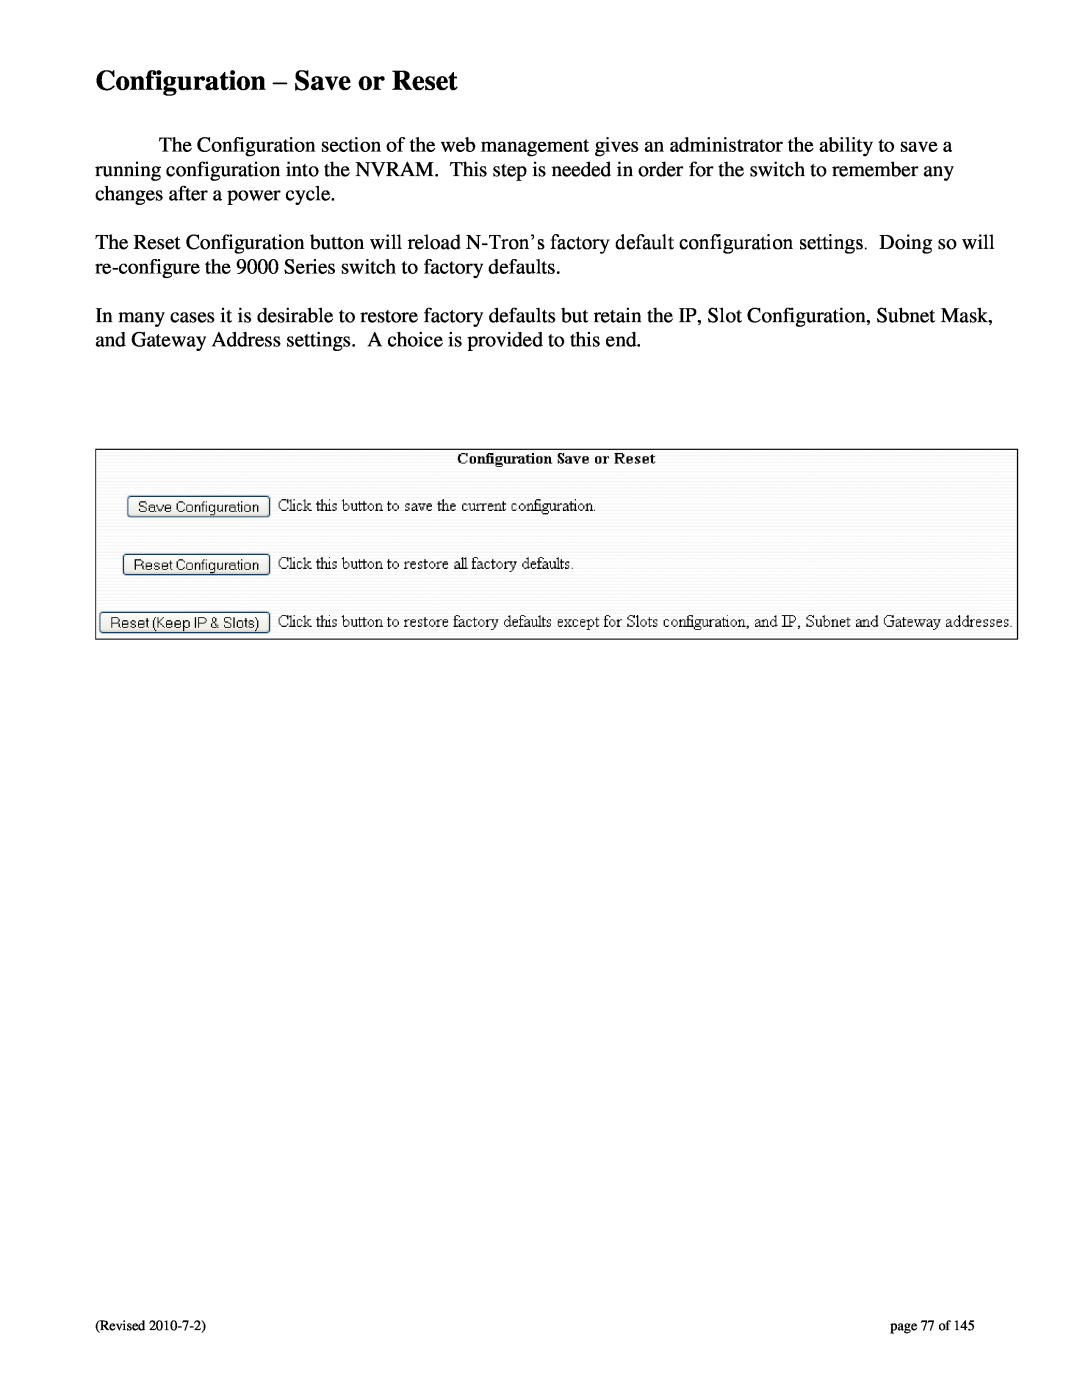 N-Tron 9000 user manual Configuration - Save or Reset, page 77 of 